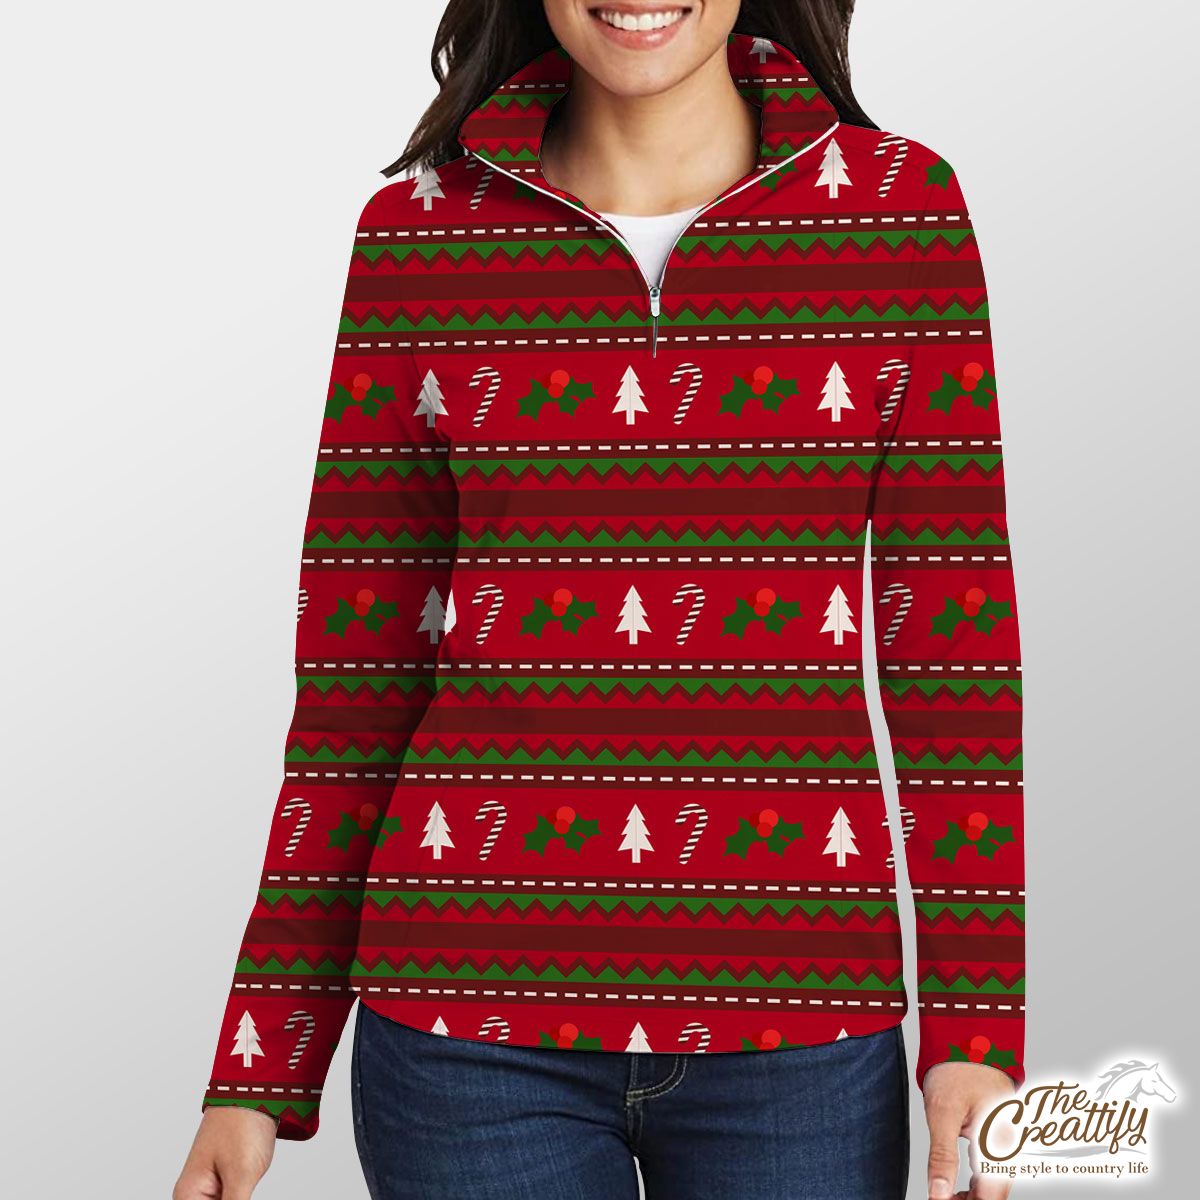 Red Green And White Christmas Tree, Holly Leaf With Candy Cane.jpg Quarter Zip Pullover